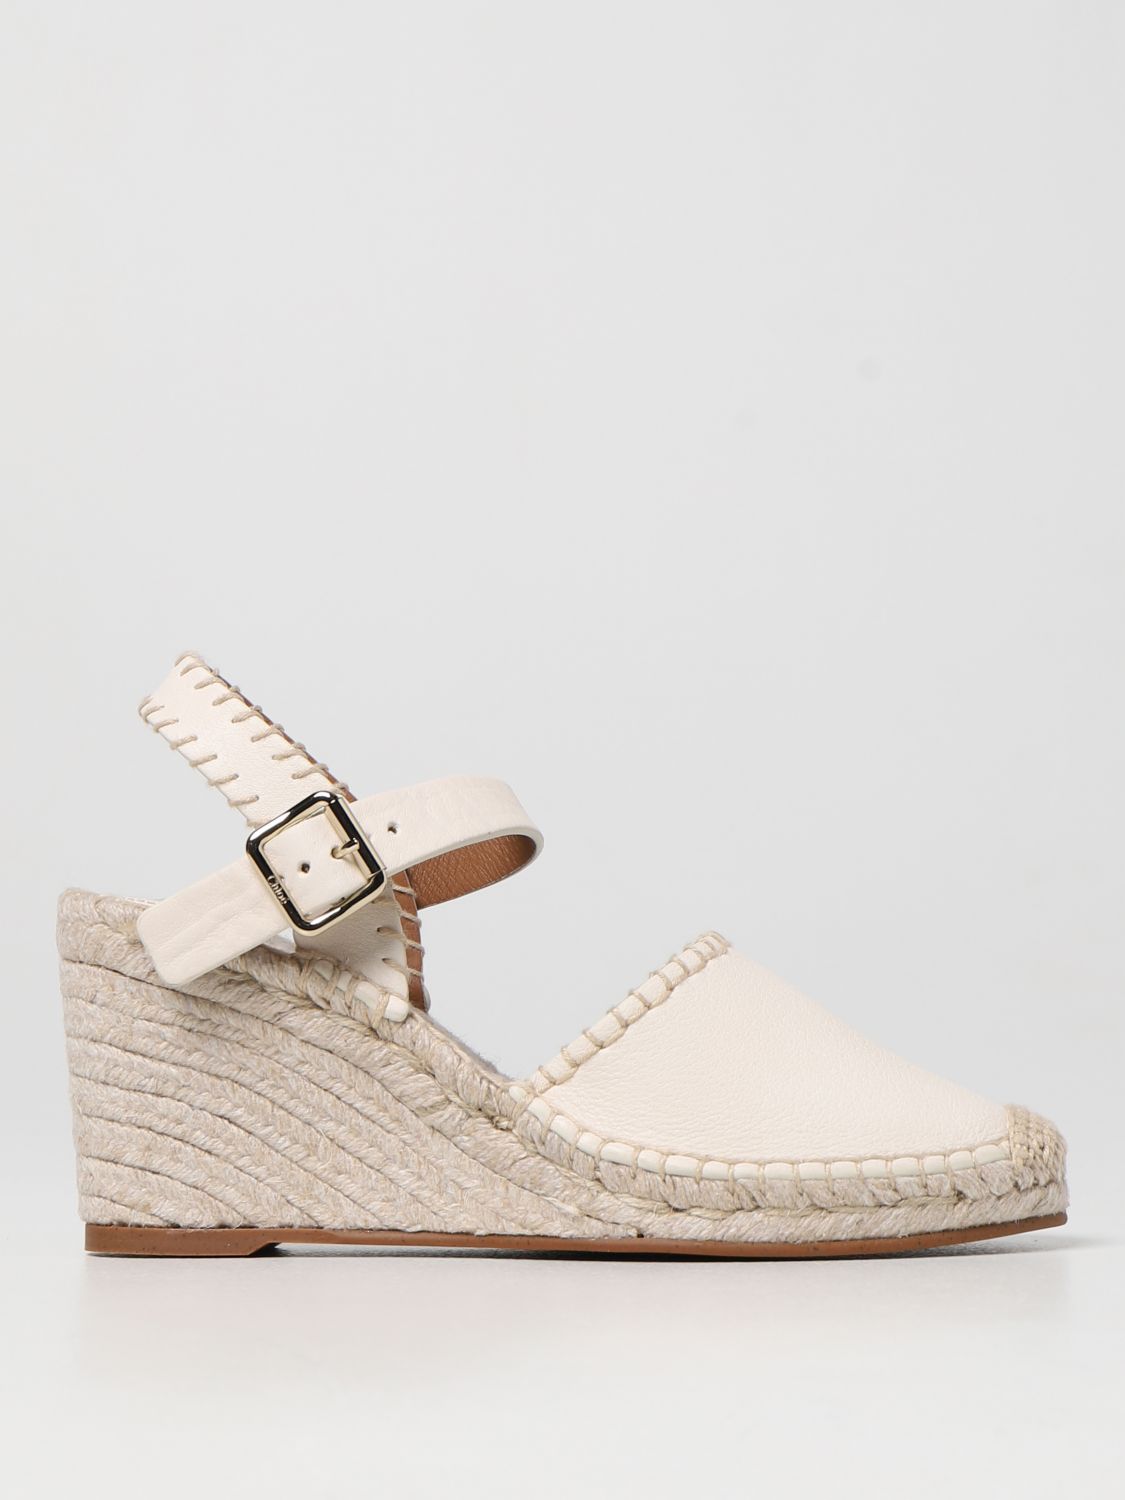 CHLOÉ: leather wedge sandals - Ivory | Chloé wedge shoes C22U644Y9 ...